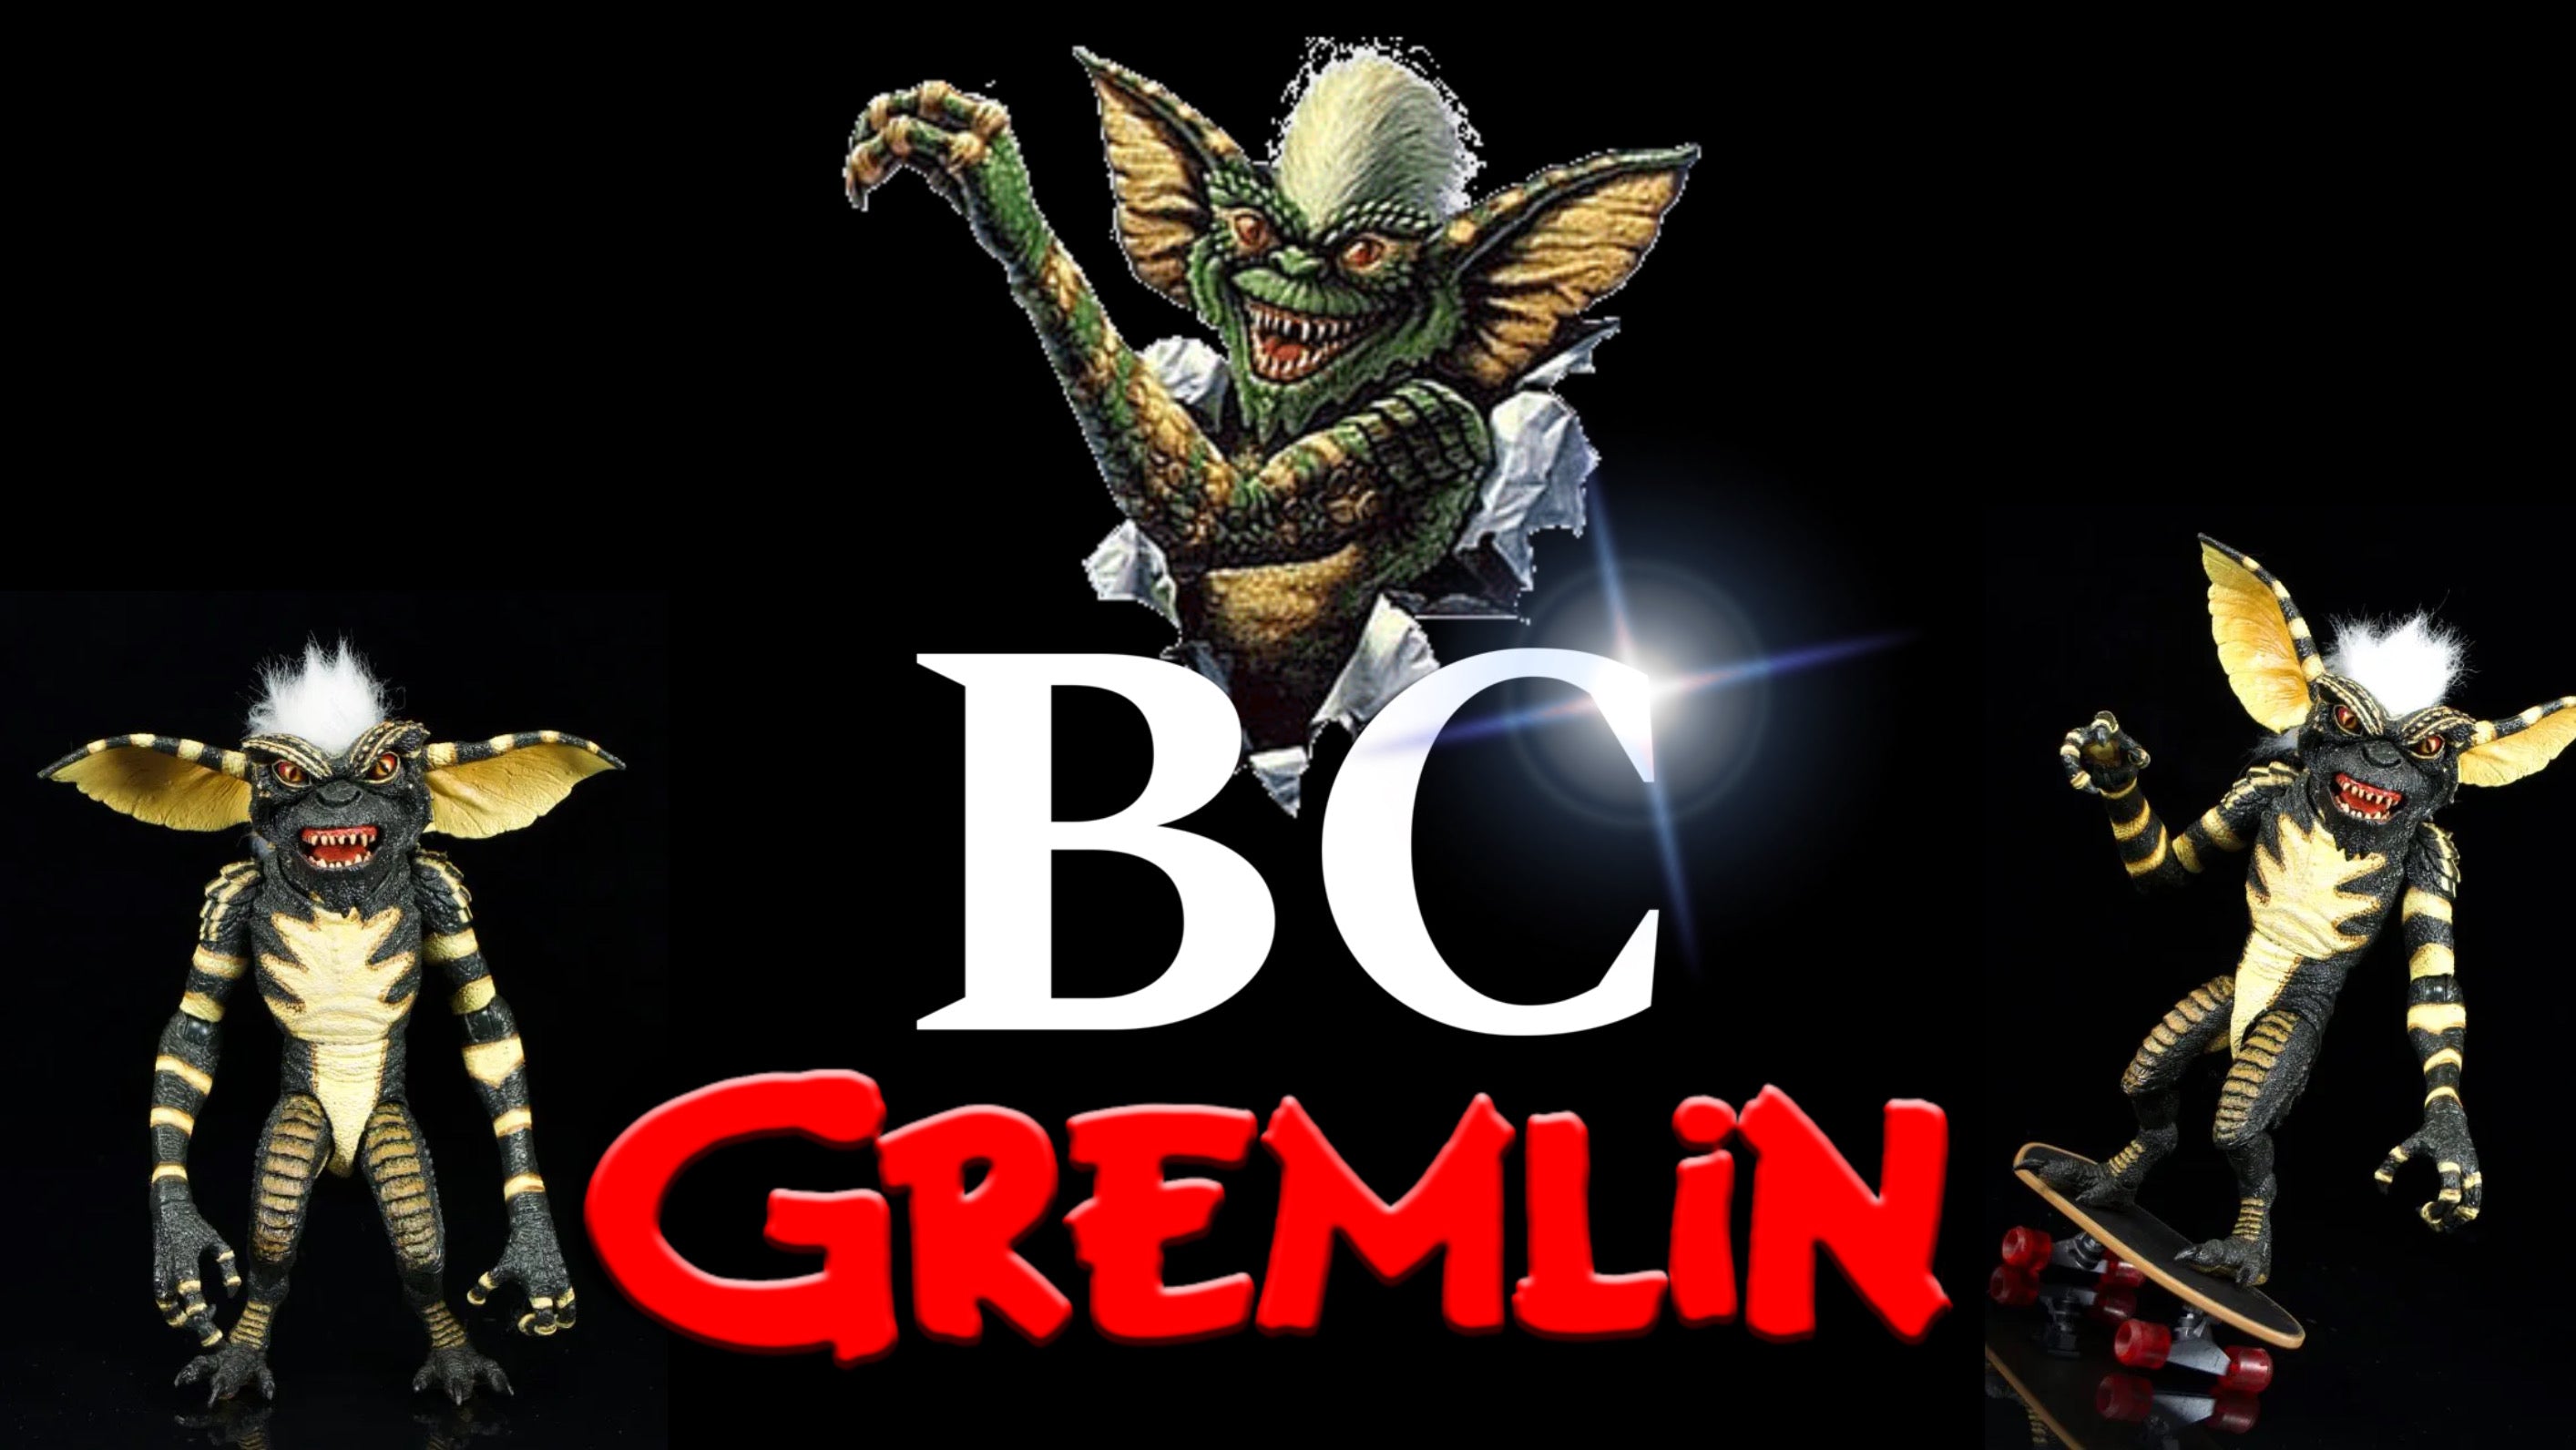 Gremlins Very Rare Exclusive Neca 2 Pack Gizmo and Stripe